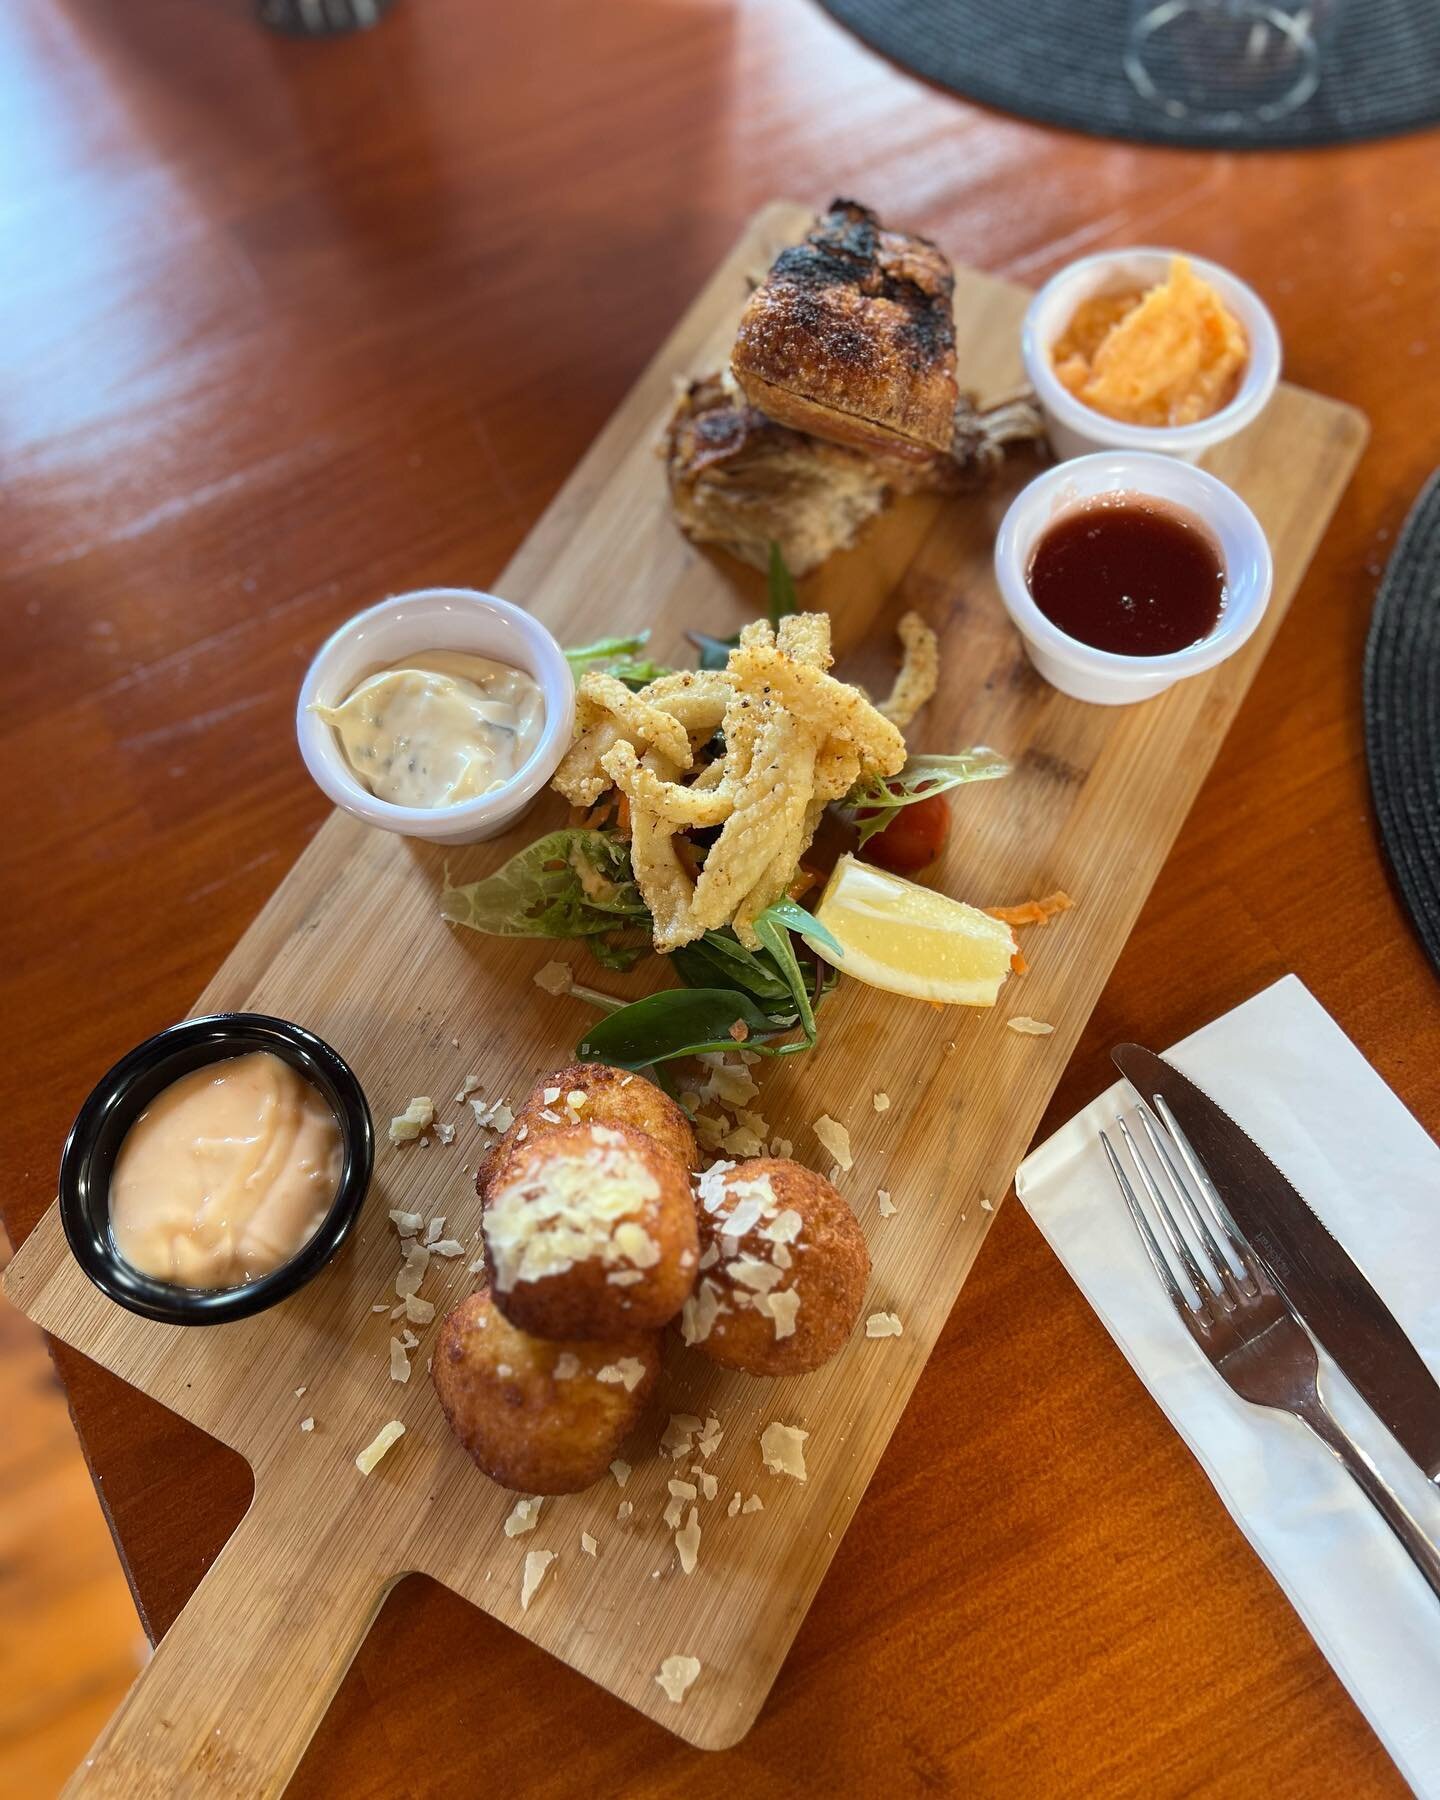 Happy Saturday!
We are fully booked in house tonight but still offering takeaway, make sure to call early to avoid missing out 🤩  #olddalystonchurch #restaurant #visitgippsland #dalyston #basscoast